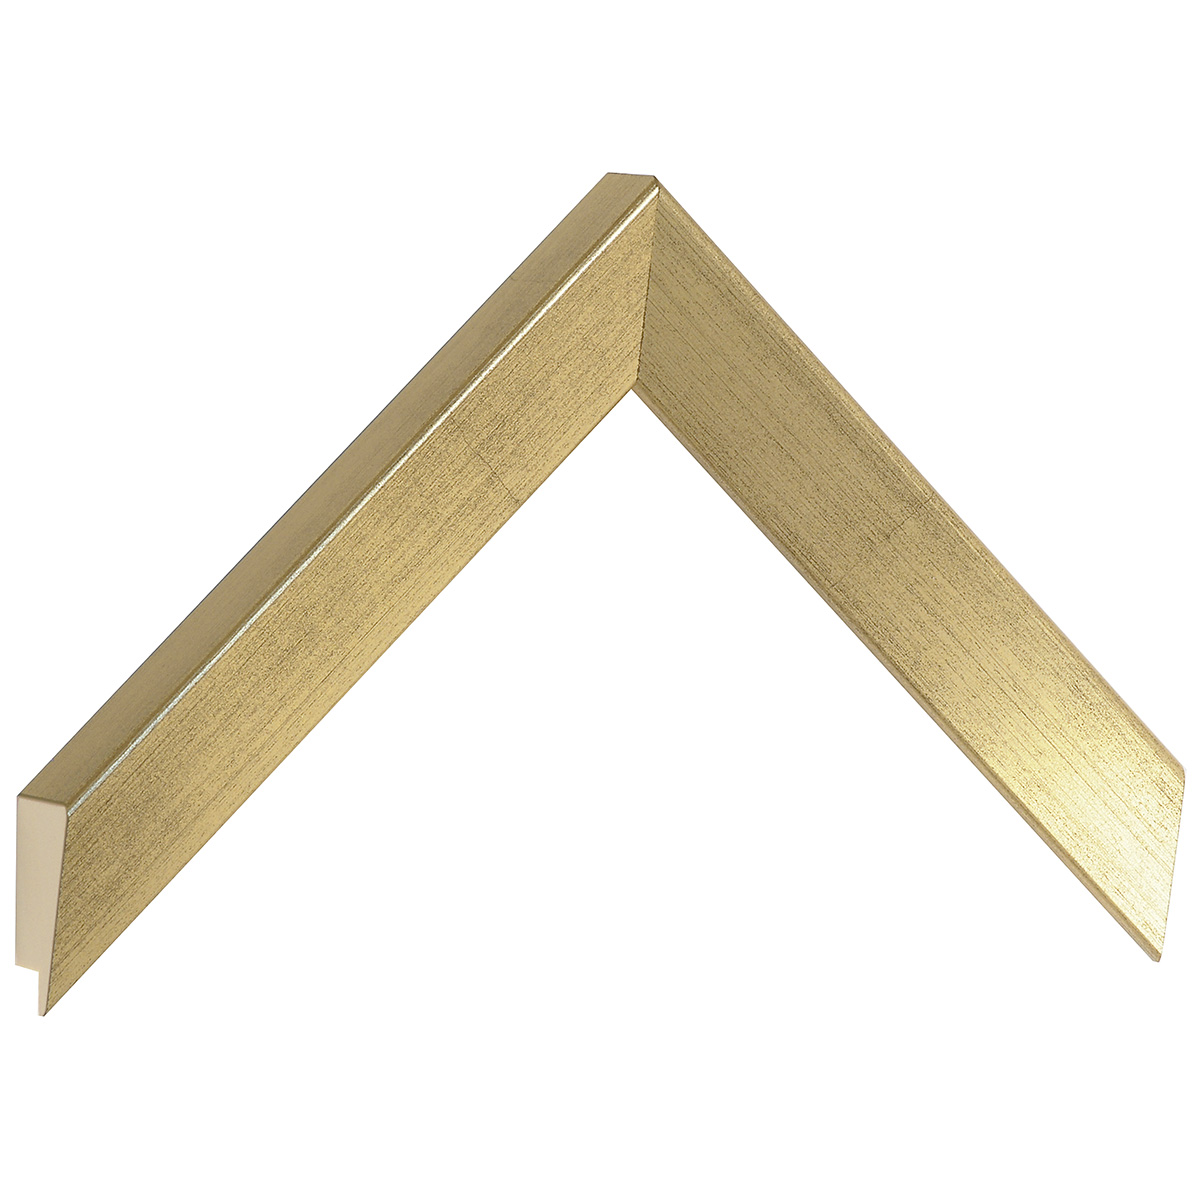 Moulding finger-jointed pine, width 23mm height 26 - gold finish - Sample